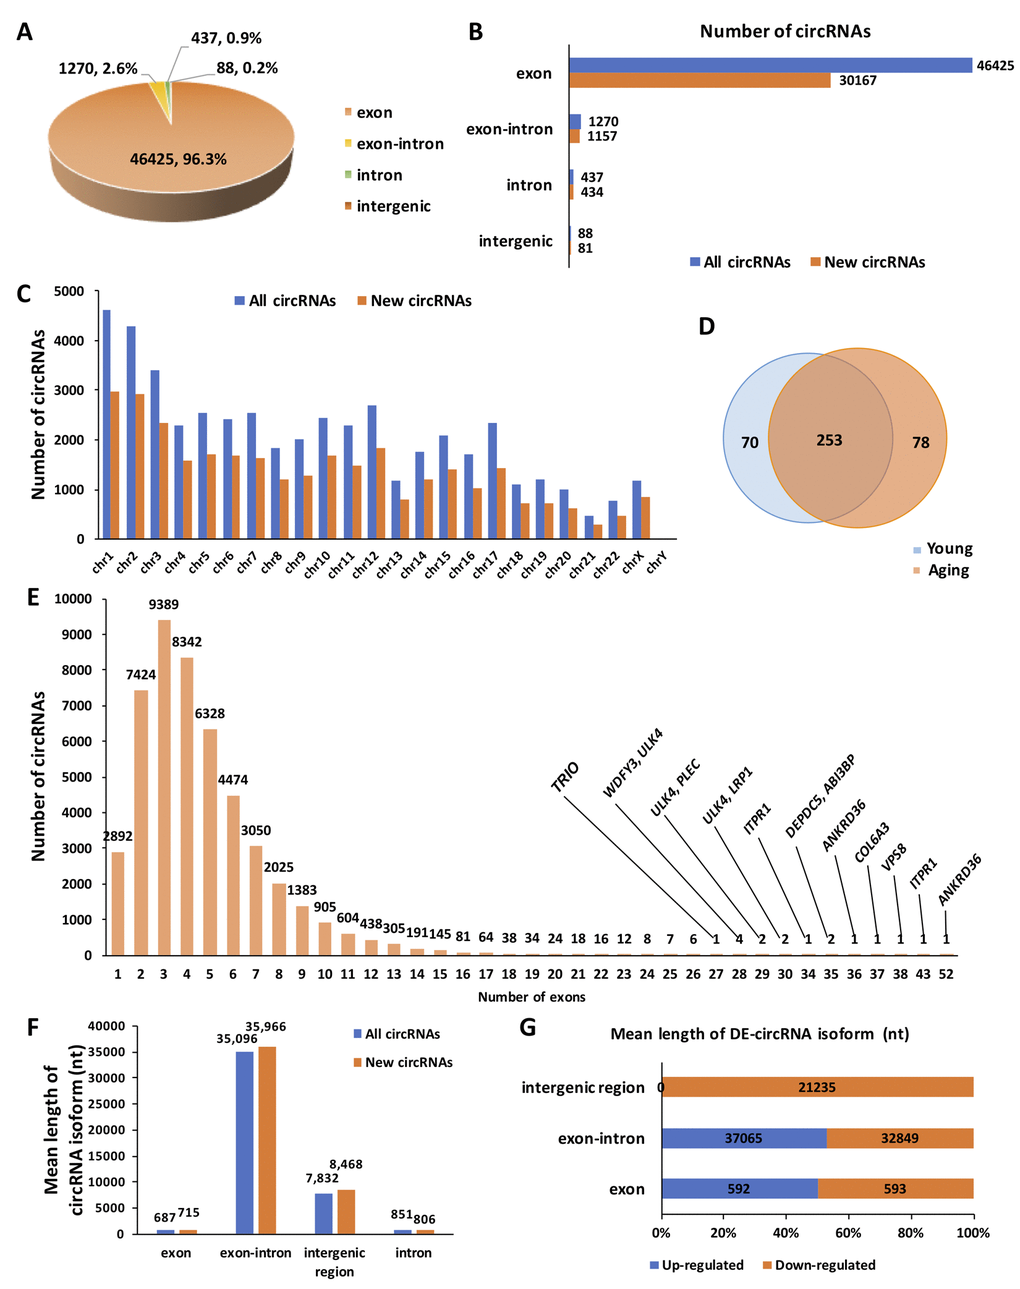 Overview of circRNA expression in human ovarian tissues. (A) The proportion of different types of circRNAs among all predicted circRNAs. (B) The proportion of newly discovered circRNAs among different types of circRNAs. (C) The distribution of newly discovered circRNAs in the human genome. (D) Differentially expressed (DE) circRNAs between young and aging human ovarian tissues. (E) The distribution of exons among all predicted circRNAs. (F) The mean length of circRNA isoforms among all predicted and newly discovered circRNAs. (G). The mean length of DE-circRNA isoforms.